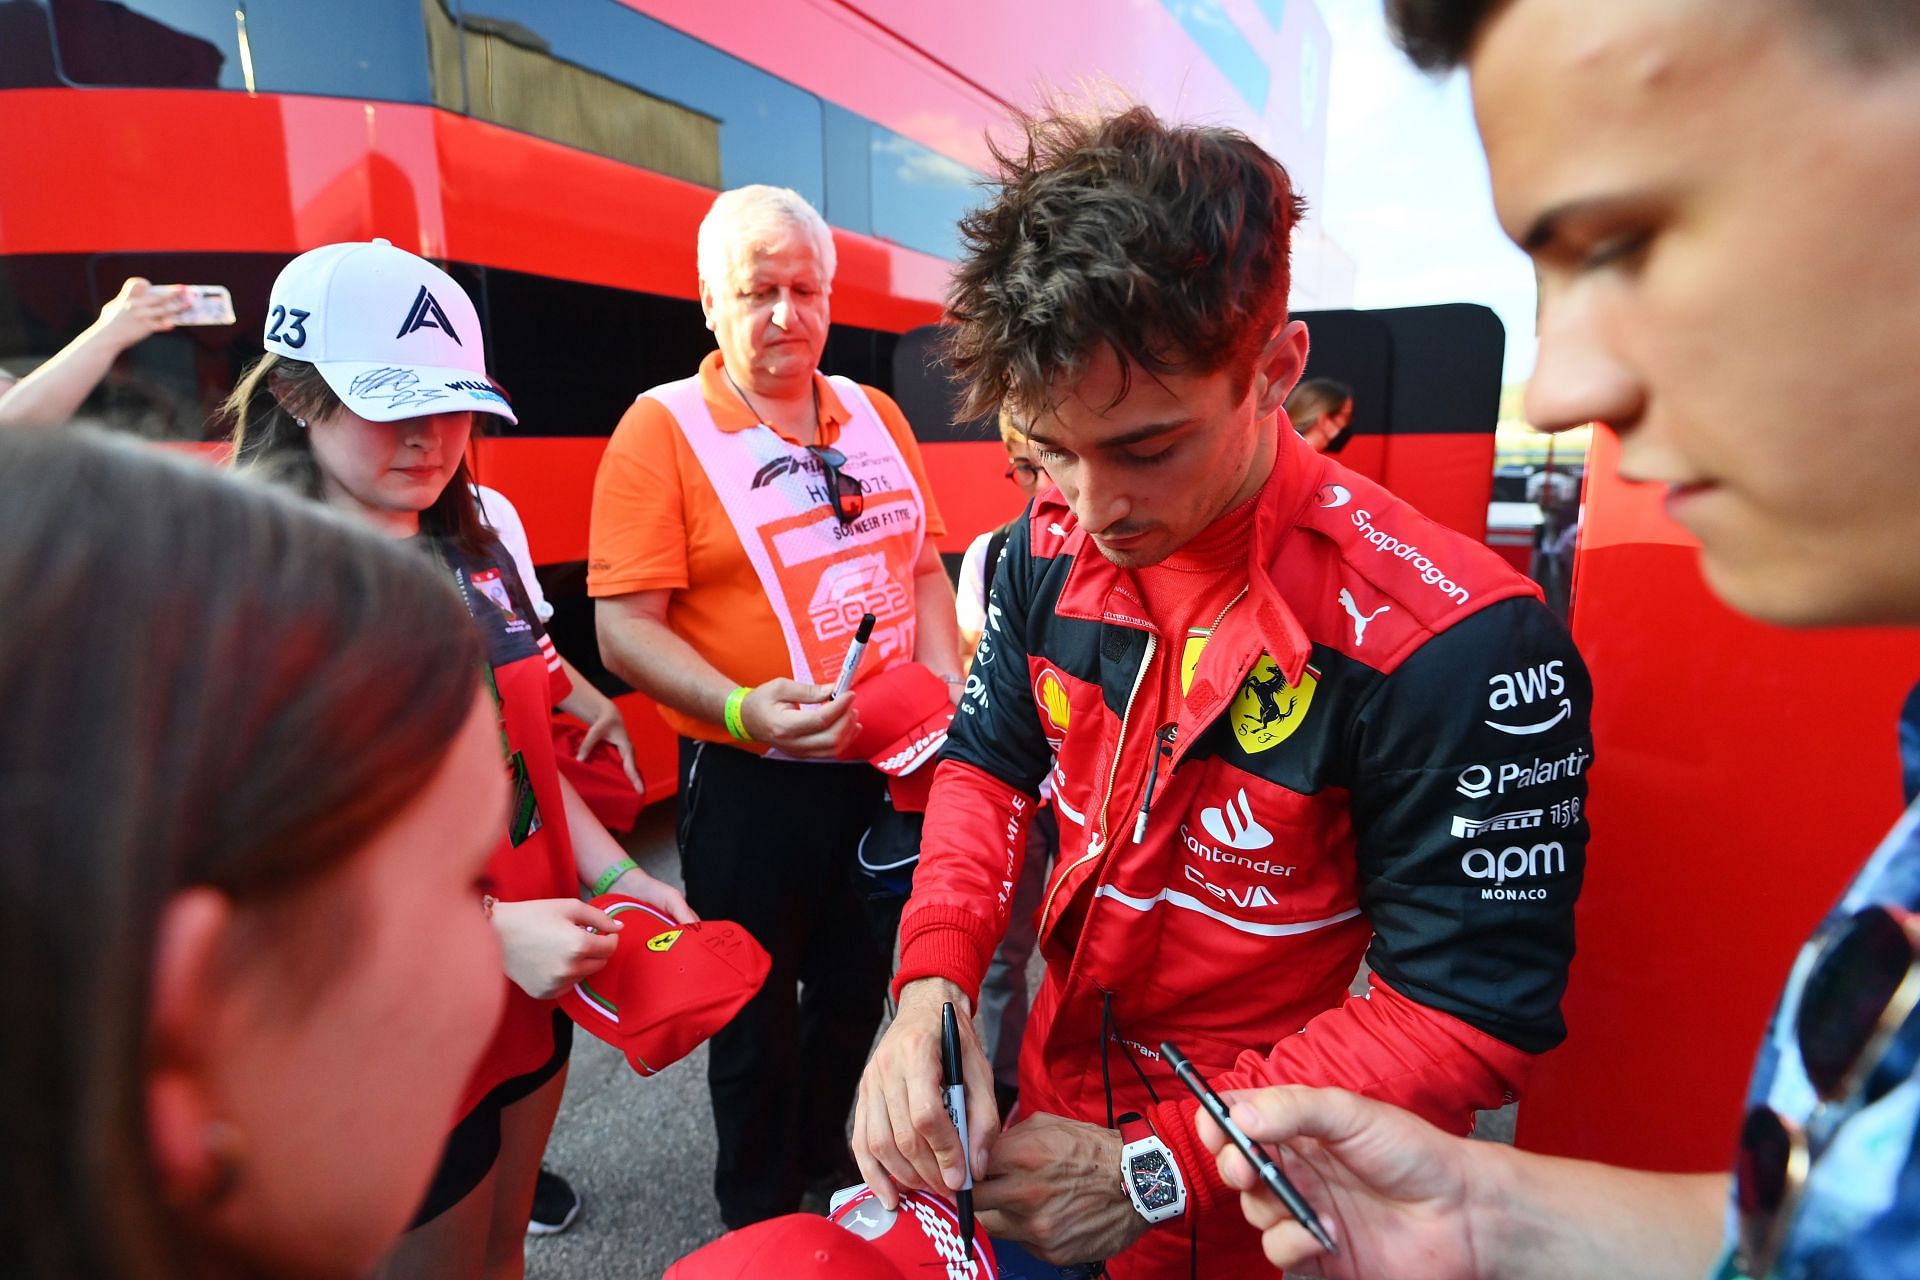 Charles Leclerc had a strong run in the 2022 F1 Hungarian GP Free Practice sessions